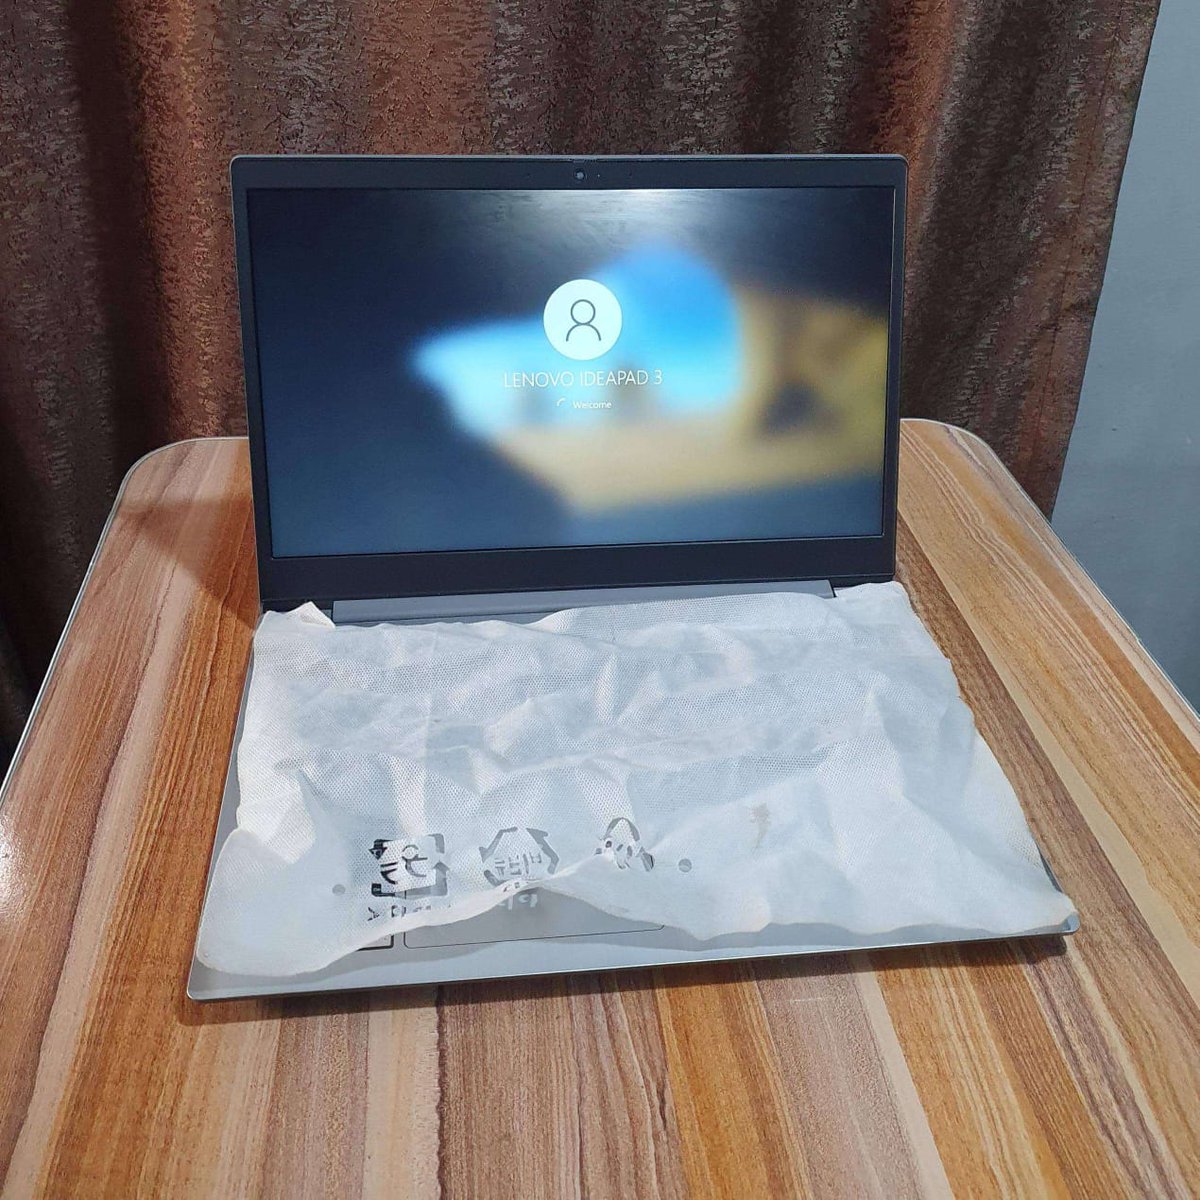 #ForSale 
#HotSales

15' Lenovo Ideapad 3 PC ,

👇🏽👇🏽👇🏽

📍10th Generation Intel Core i3 Processor
📍Intel UHD Graphic 4 cores 8 logical processors 
📍1TB HDD
📍4GB RAM

Original Price  >> #150,000
Contact - 08025392442
It's Negotiable. DM or Call.
Help me and share.